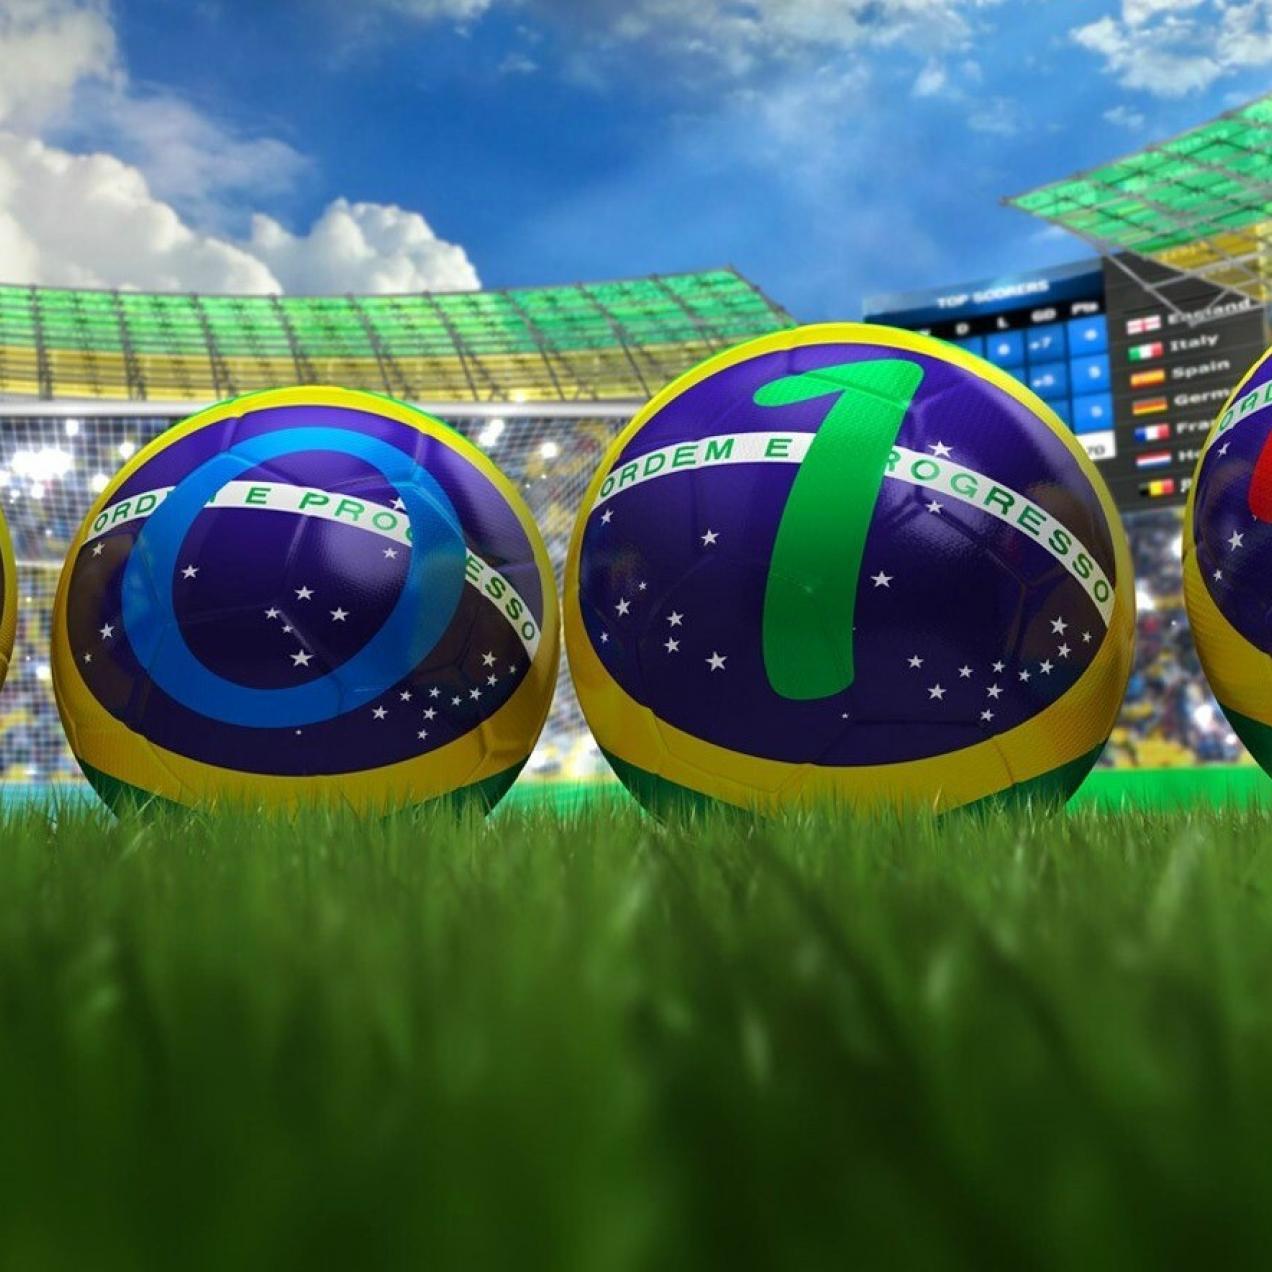 World Cup 2014 Schedule: Watch Every Match